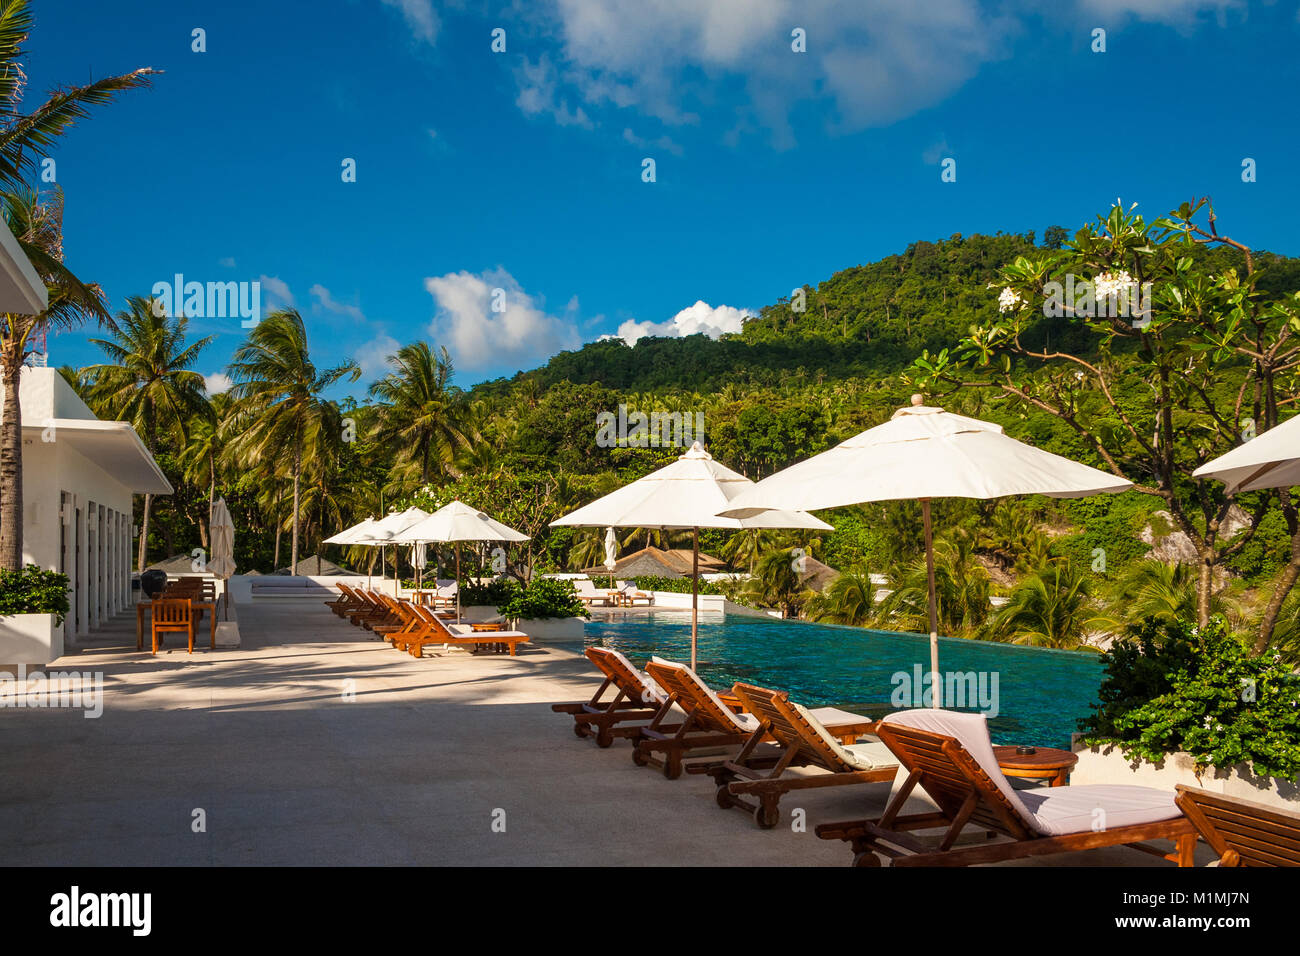 A perfect holiday photo of empty deck chairs and patio umbrellas in between, lined up in front of an infinity pool on a tropical island. Stock Photo